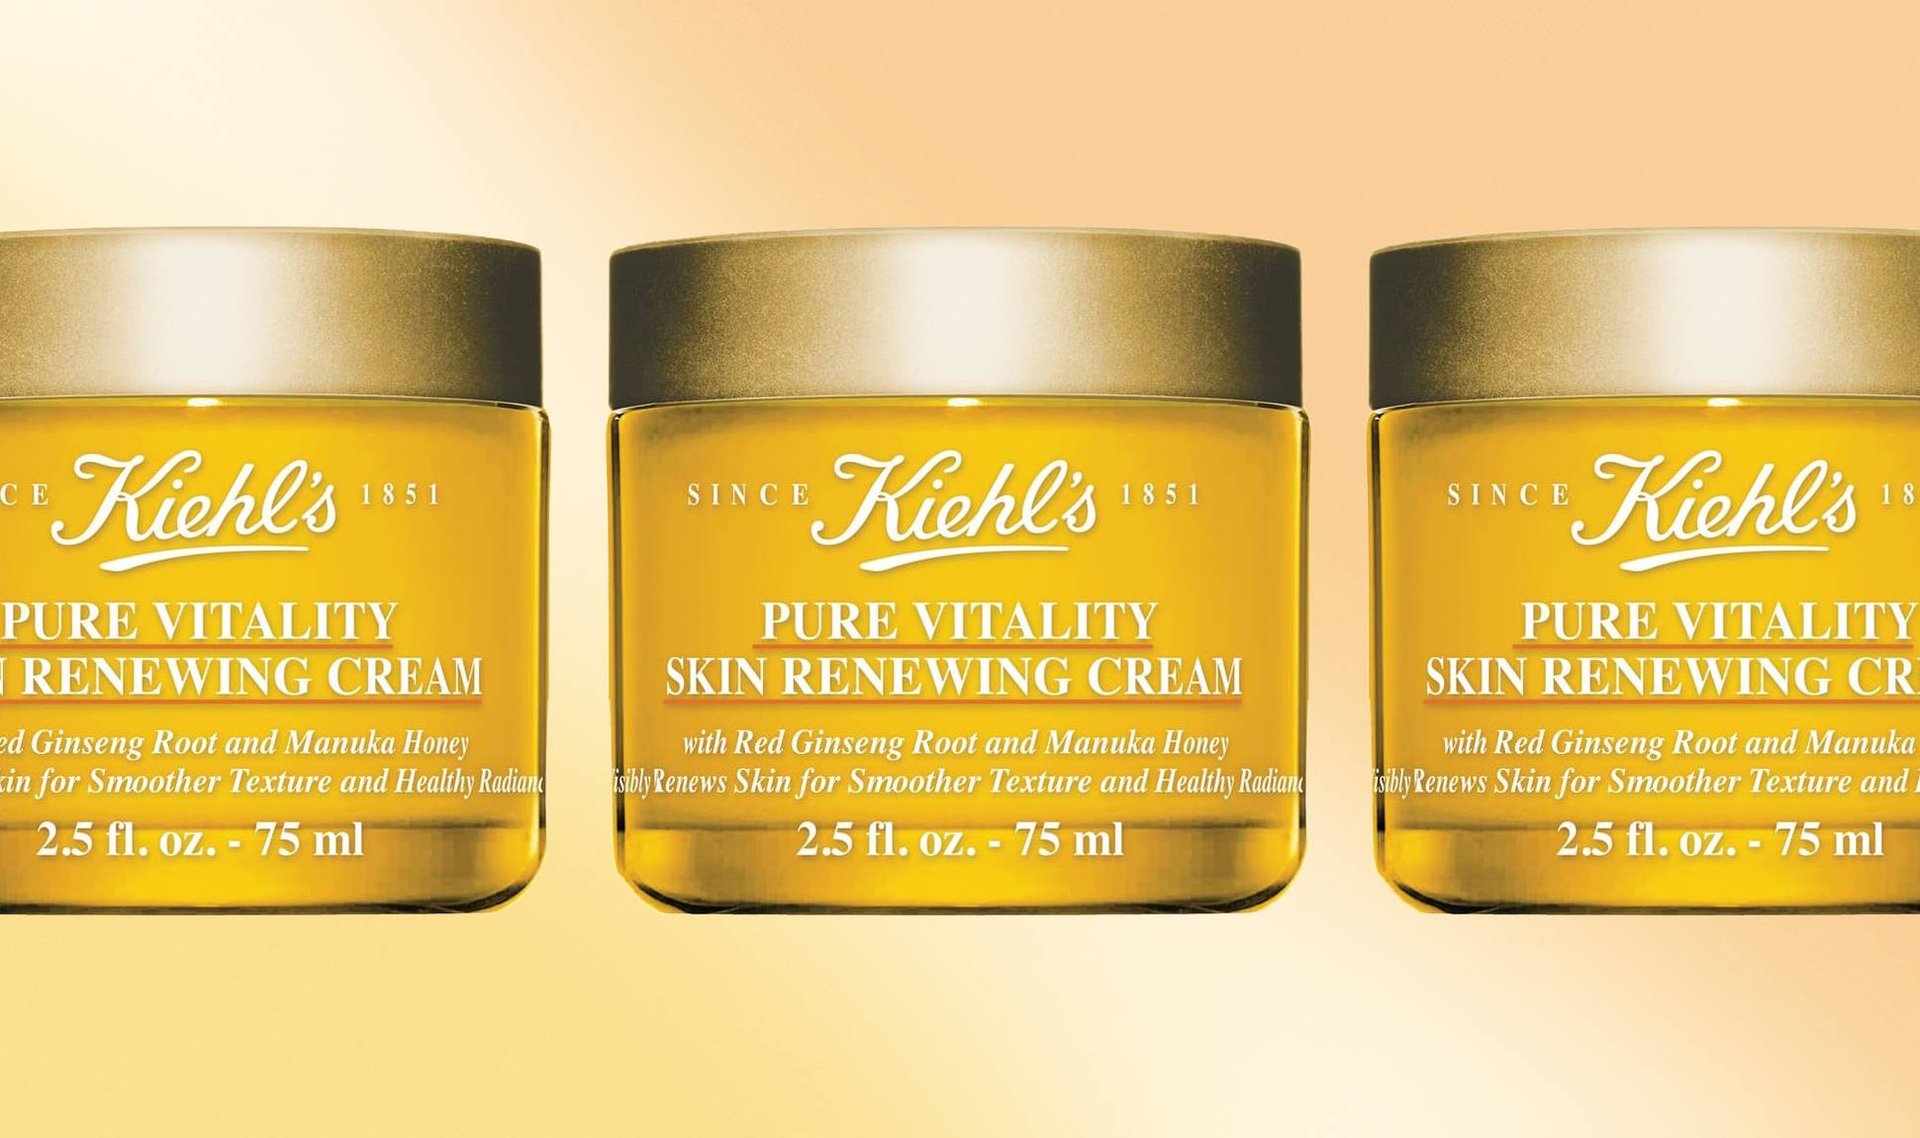 Here’s What Makes the Kiehl’s Pure Vitality Skin Renewing Cream So Different From Other Moisturizers